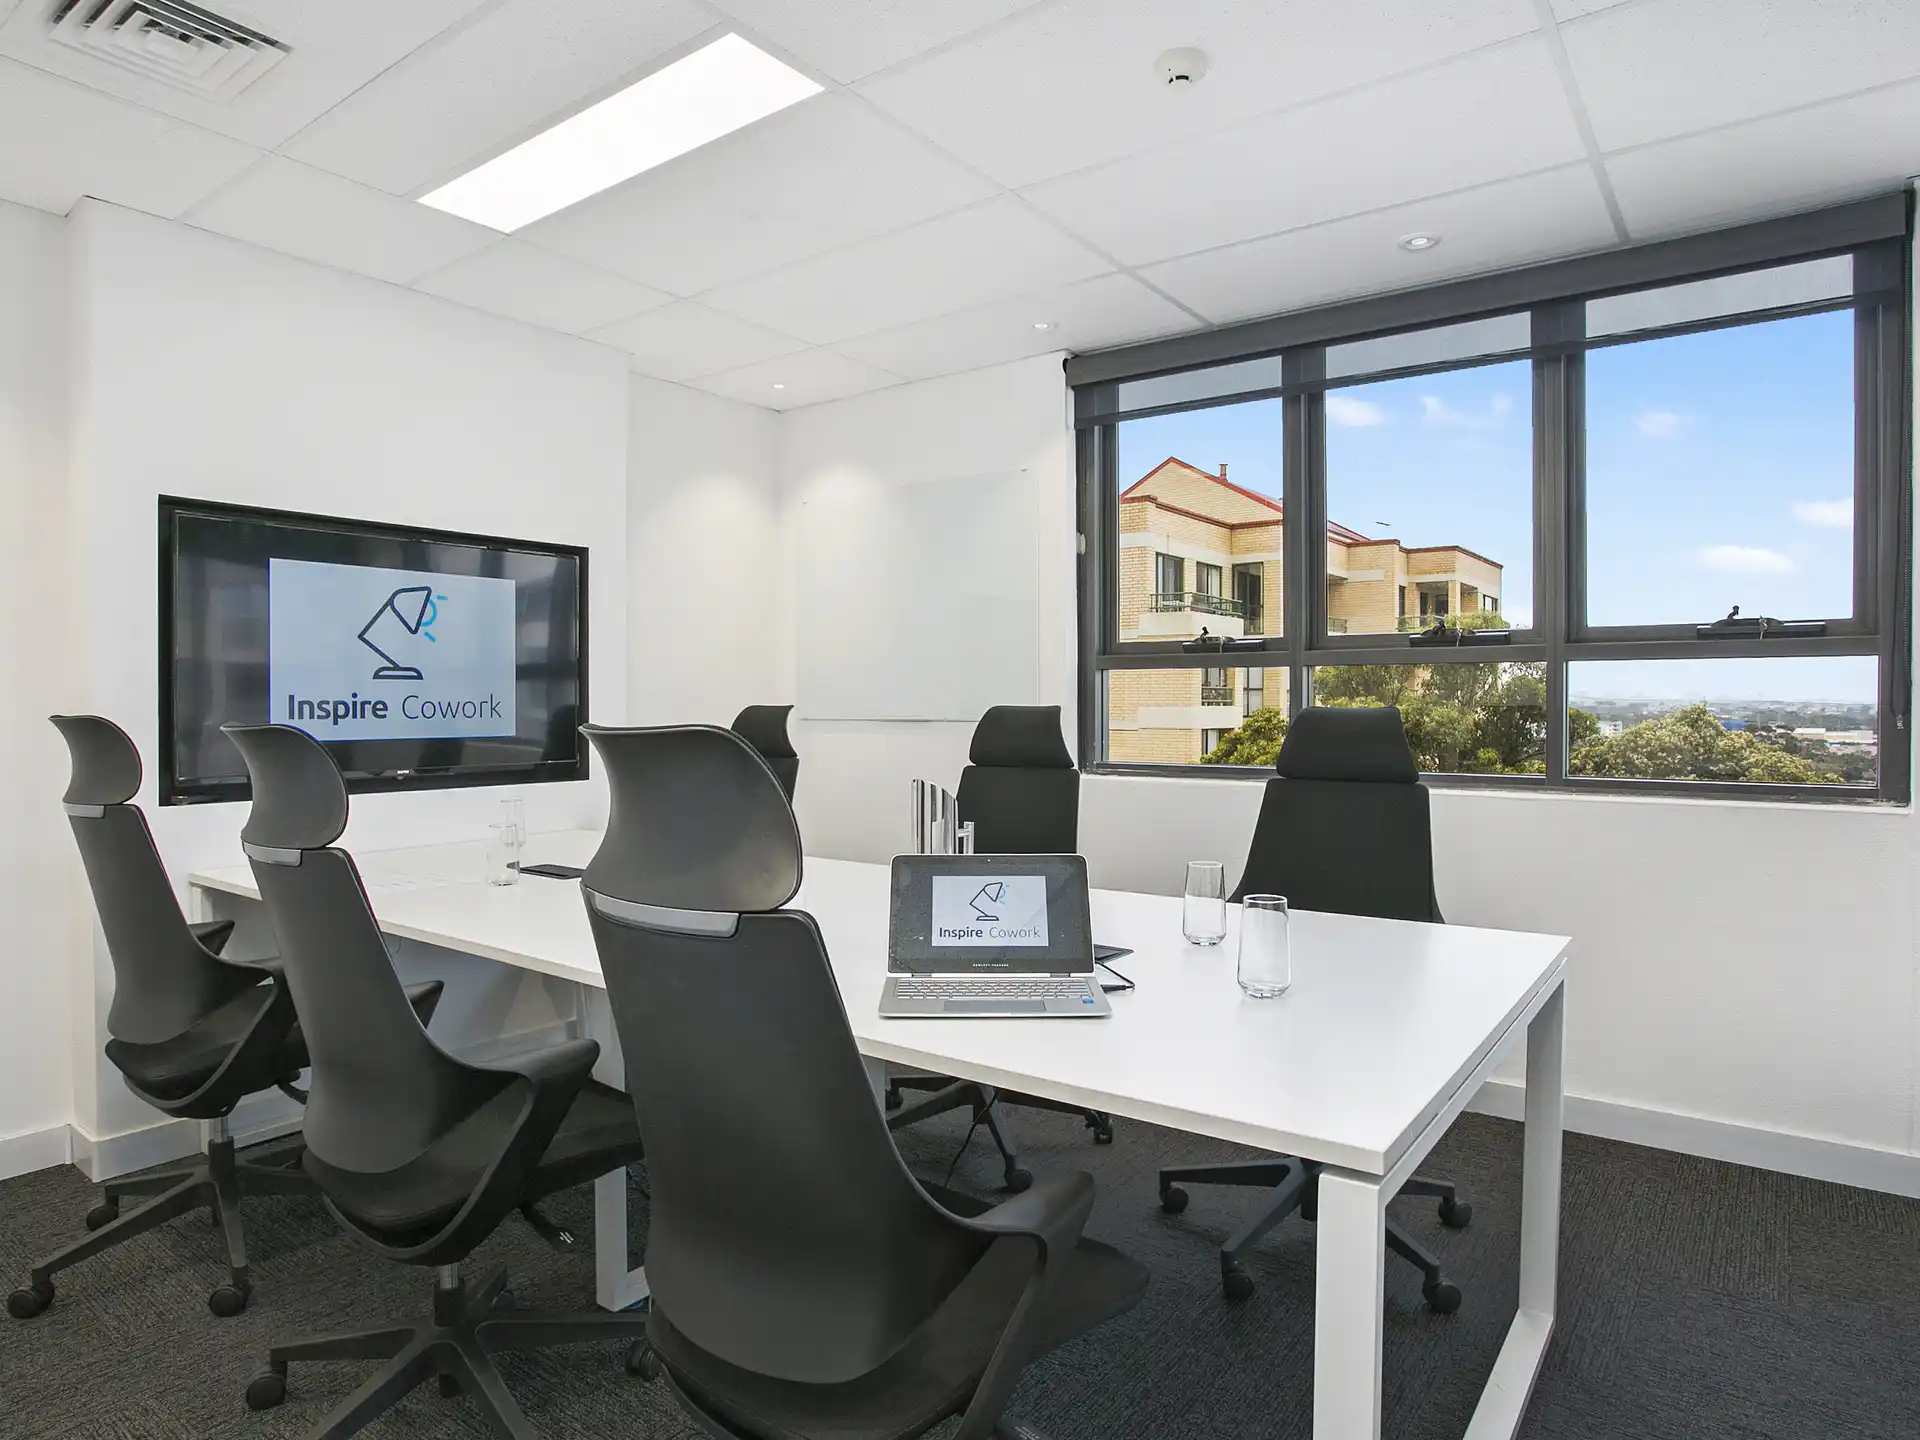 Meeting rooms with natural light, large screen monitor